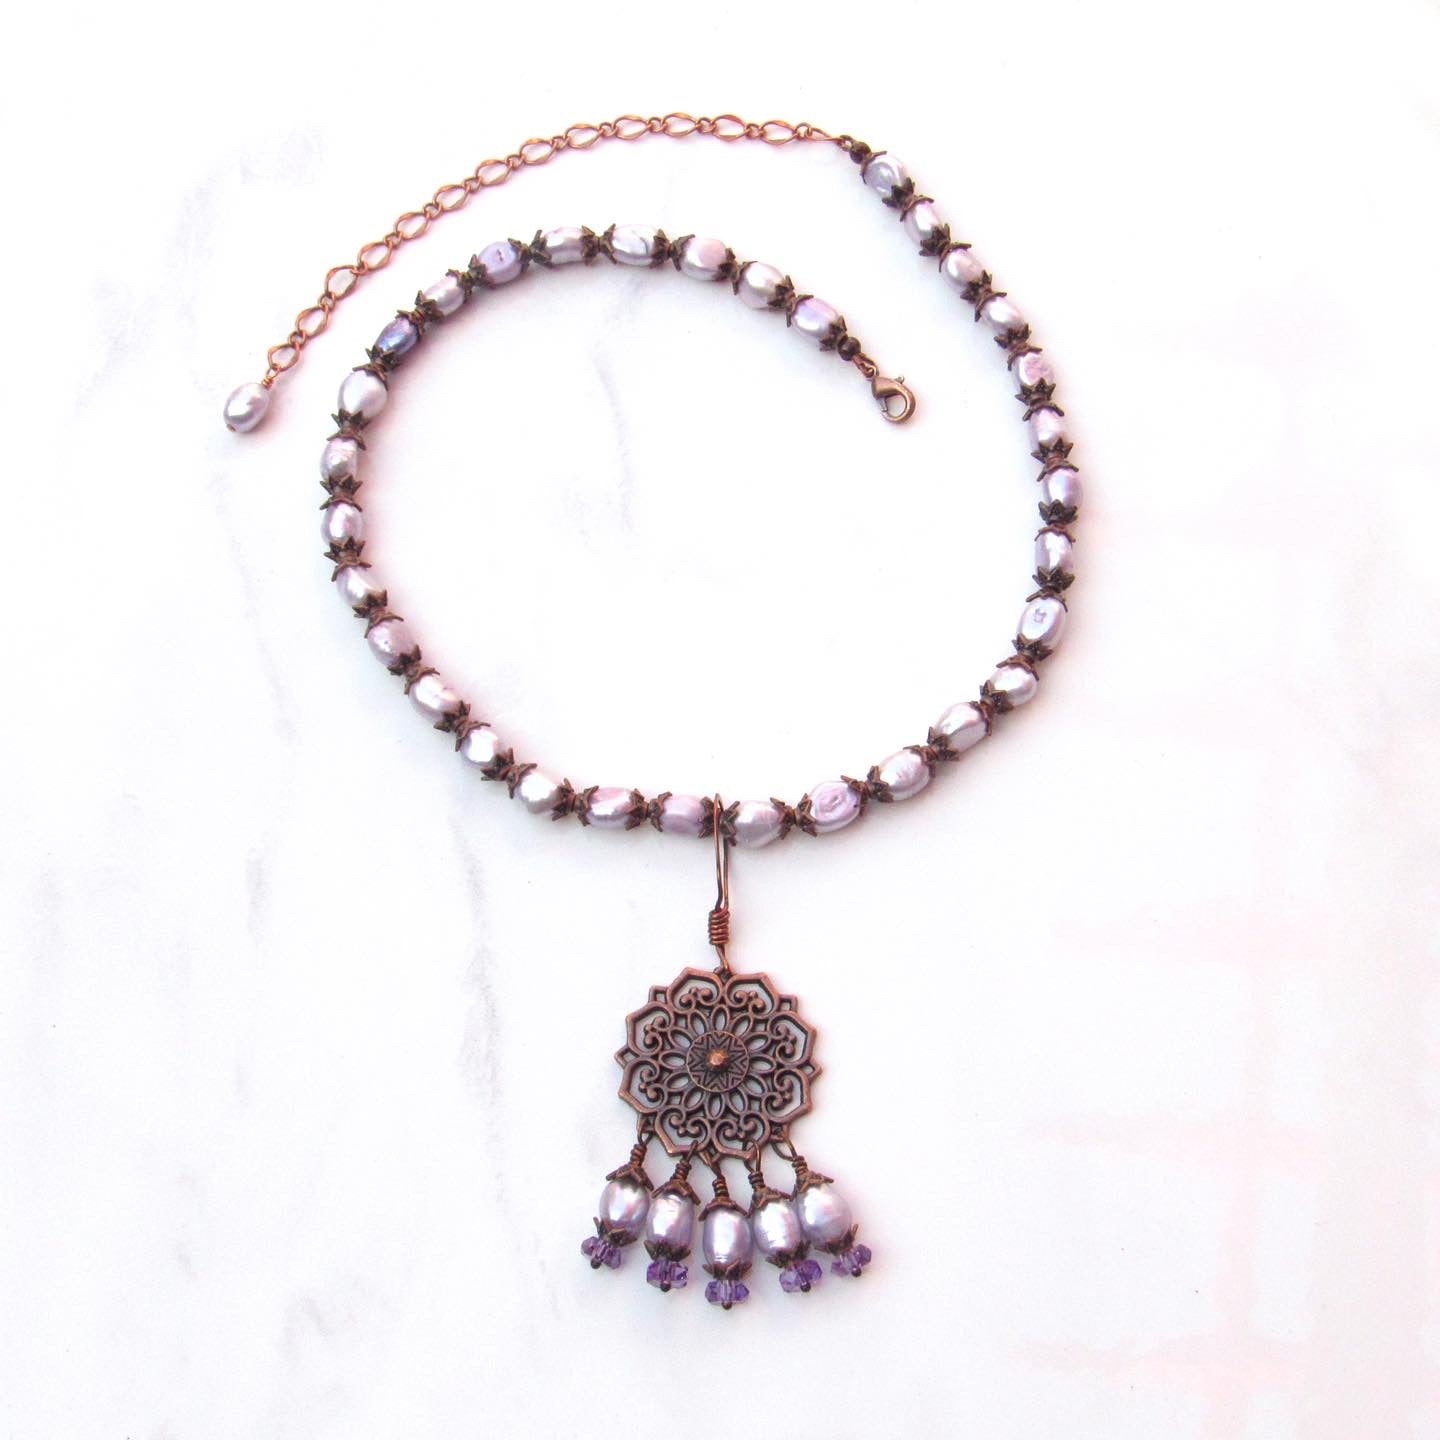 Purple freshwater pearls, amethyst gemstones, and copper chain and pendant design.